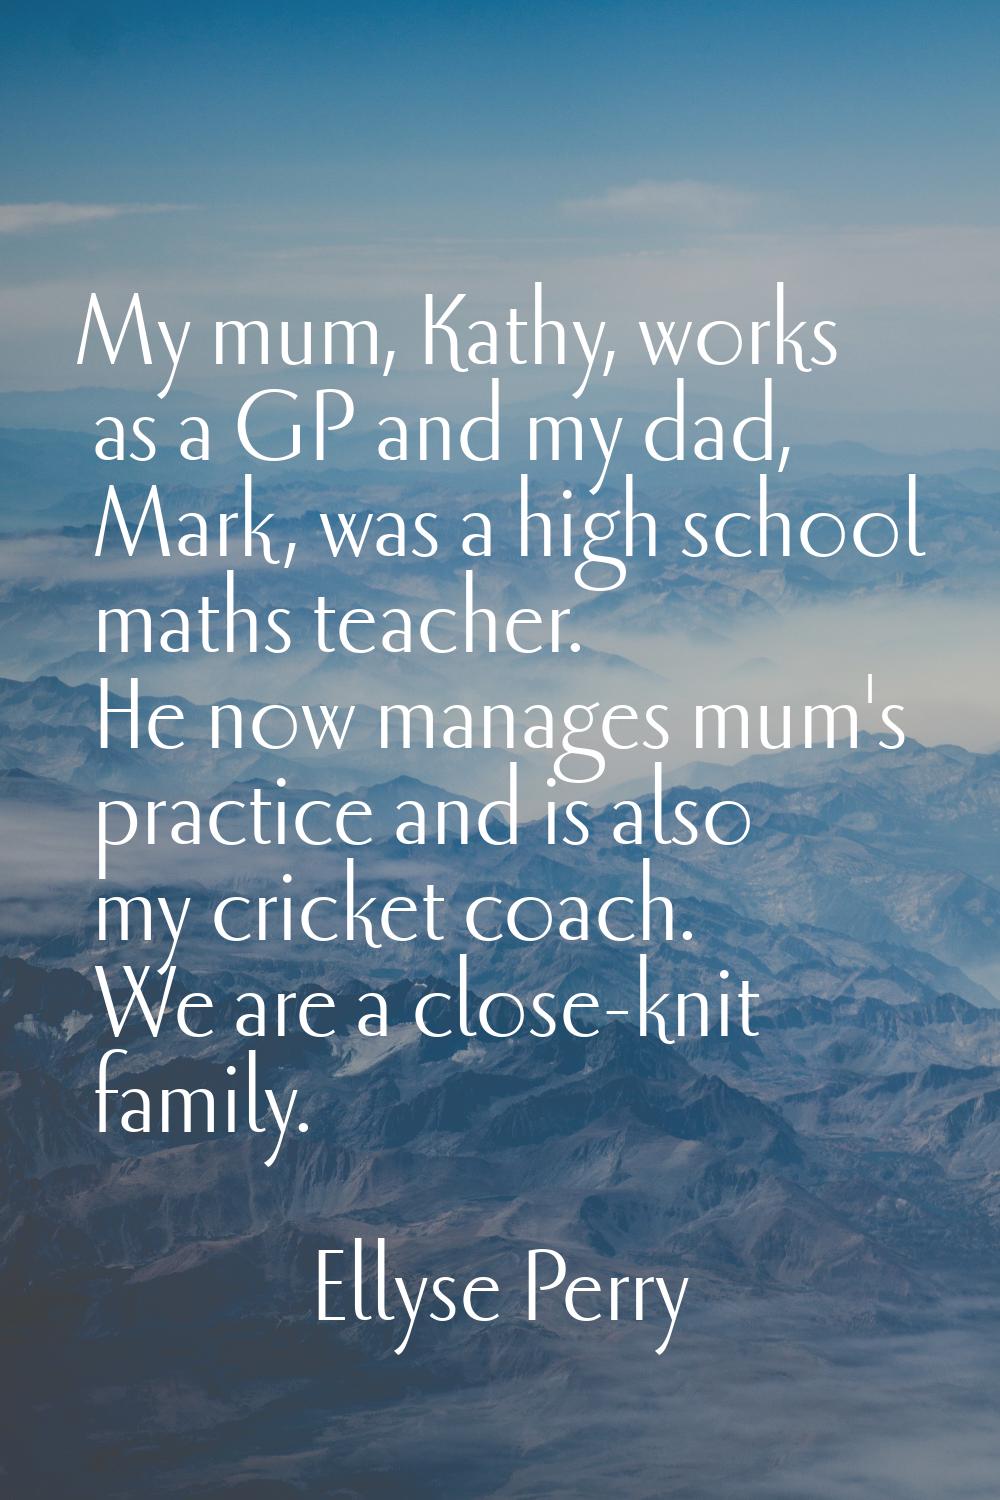 My mum, Kathy, works as a GP and my dad, Mark, was a high school maths teacher. He now manages mum'